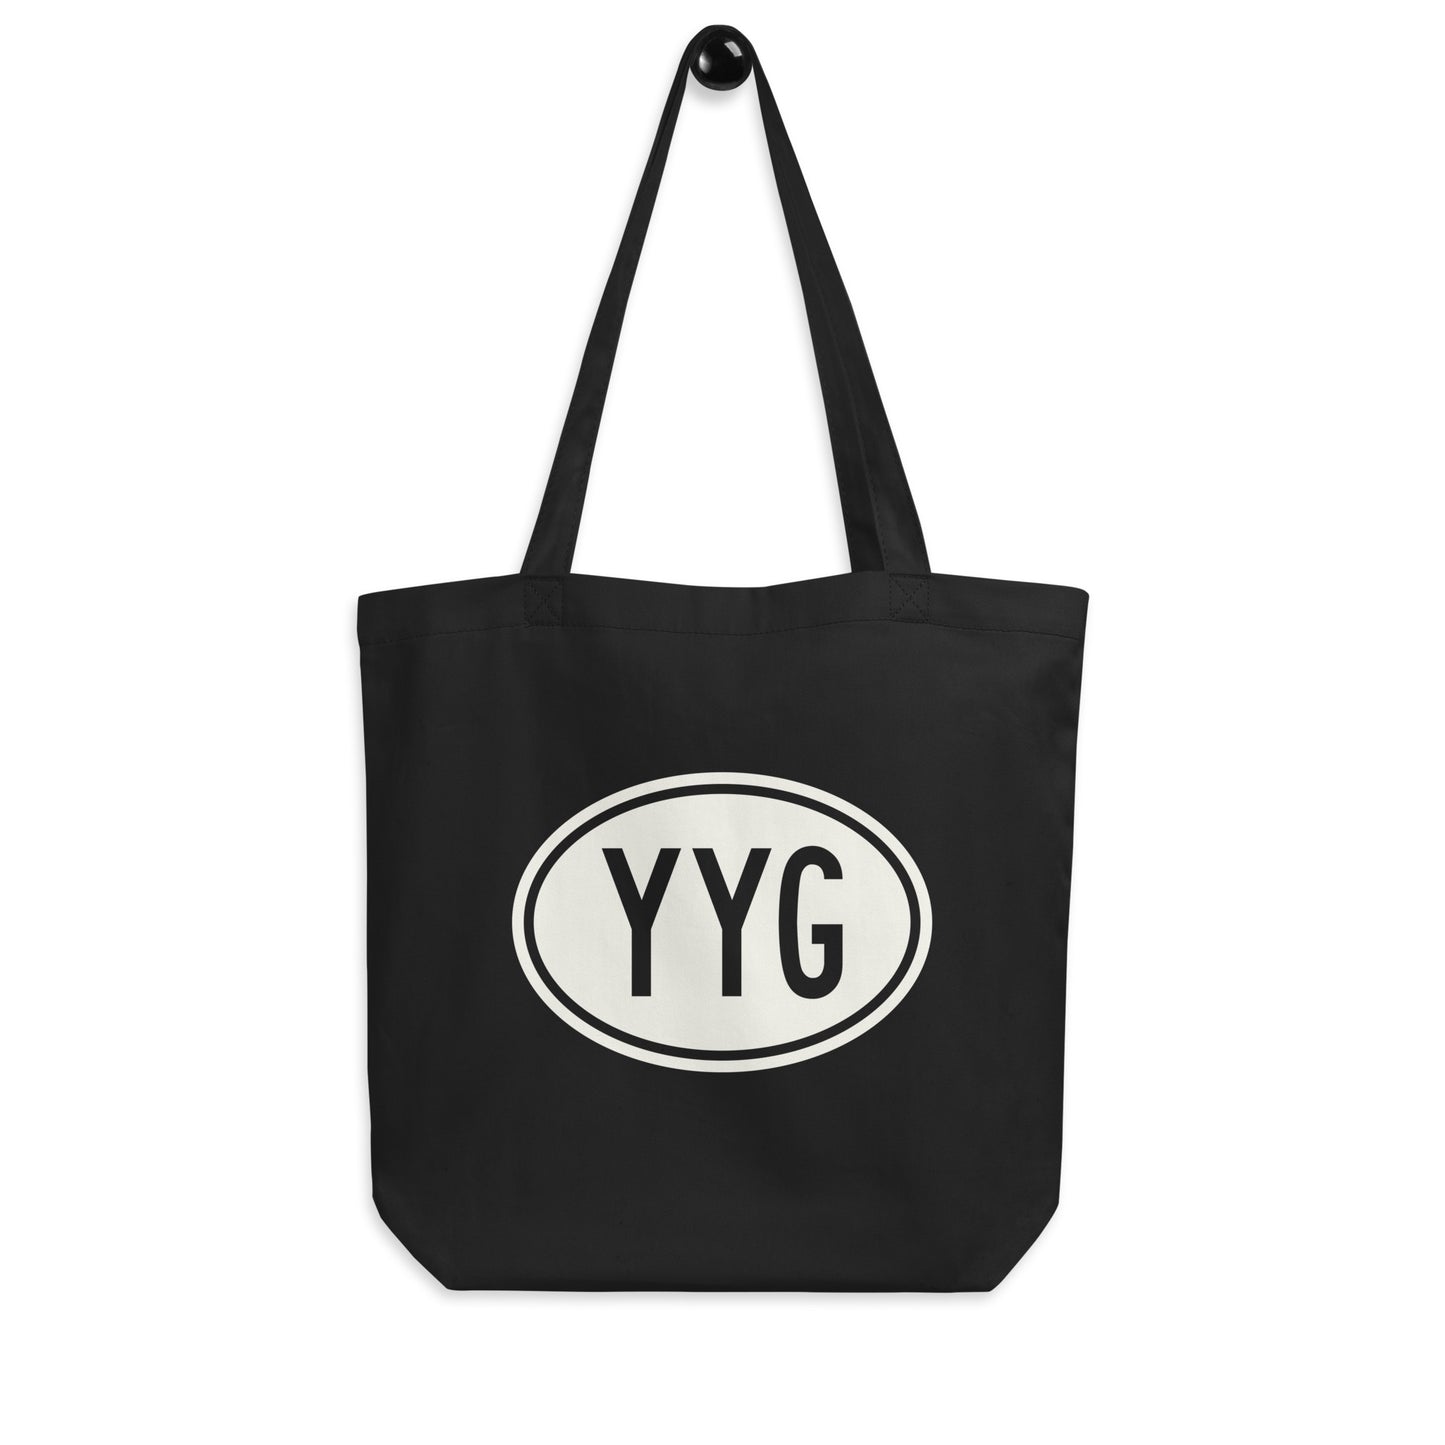 Unique Travel Gift Organic Tote - White Oval • YYG Charlottetown • YHM Designs - Image 04